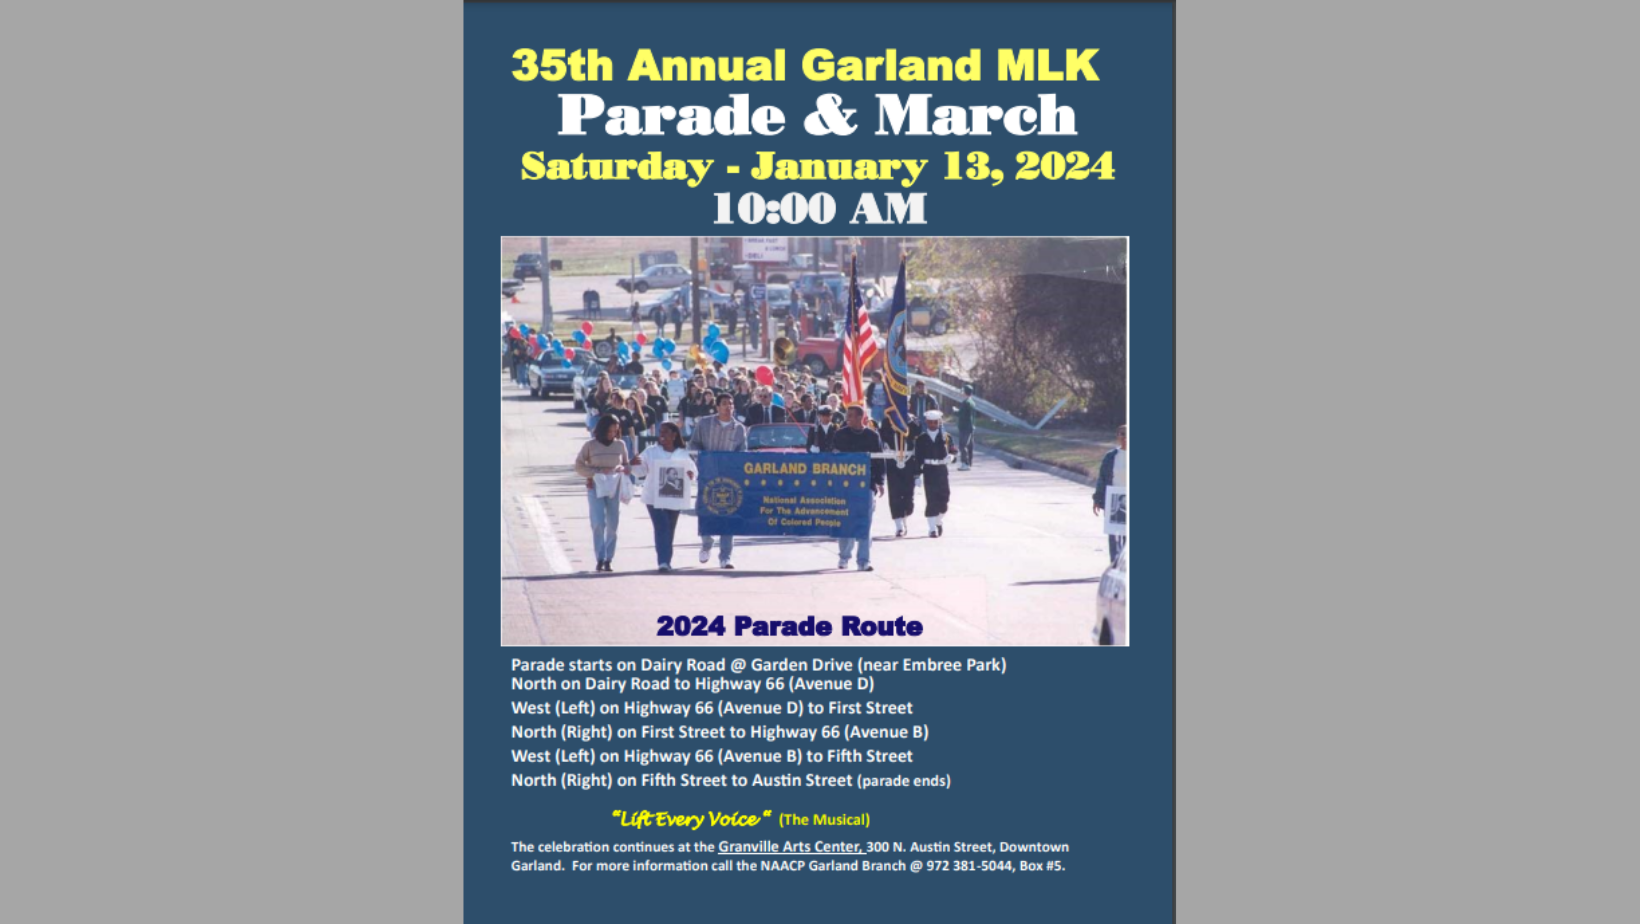 Garland Commemorates Civil Rights Icon with 35th Annual MLK Parade